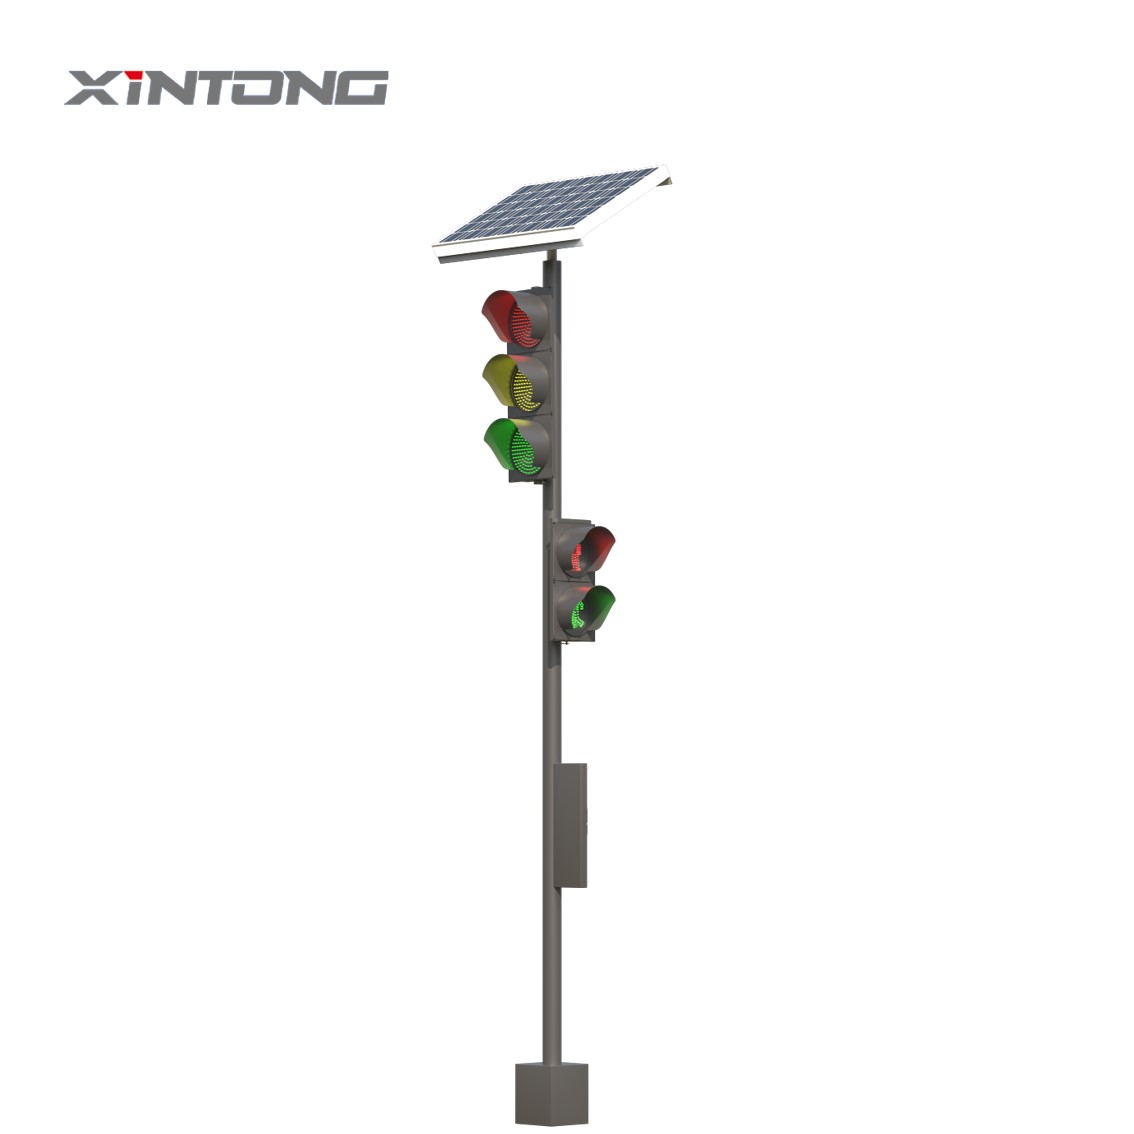 Top 5 Electric Pole Designs for Urban Streets